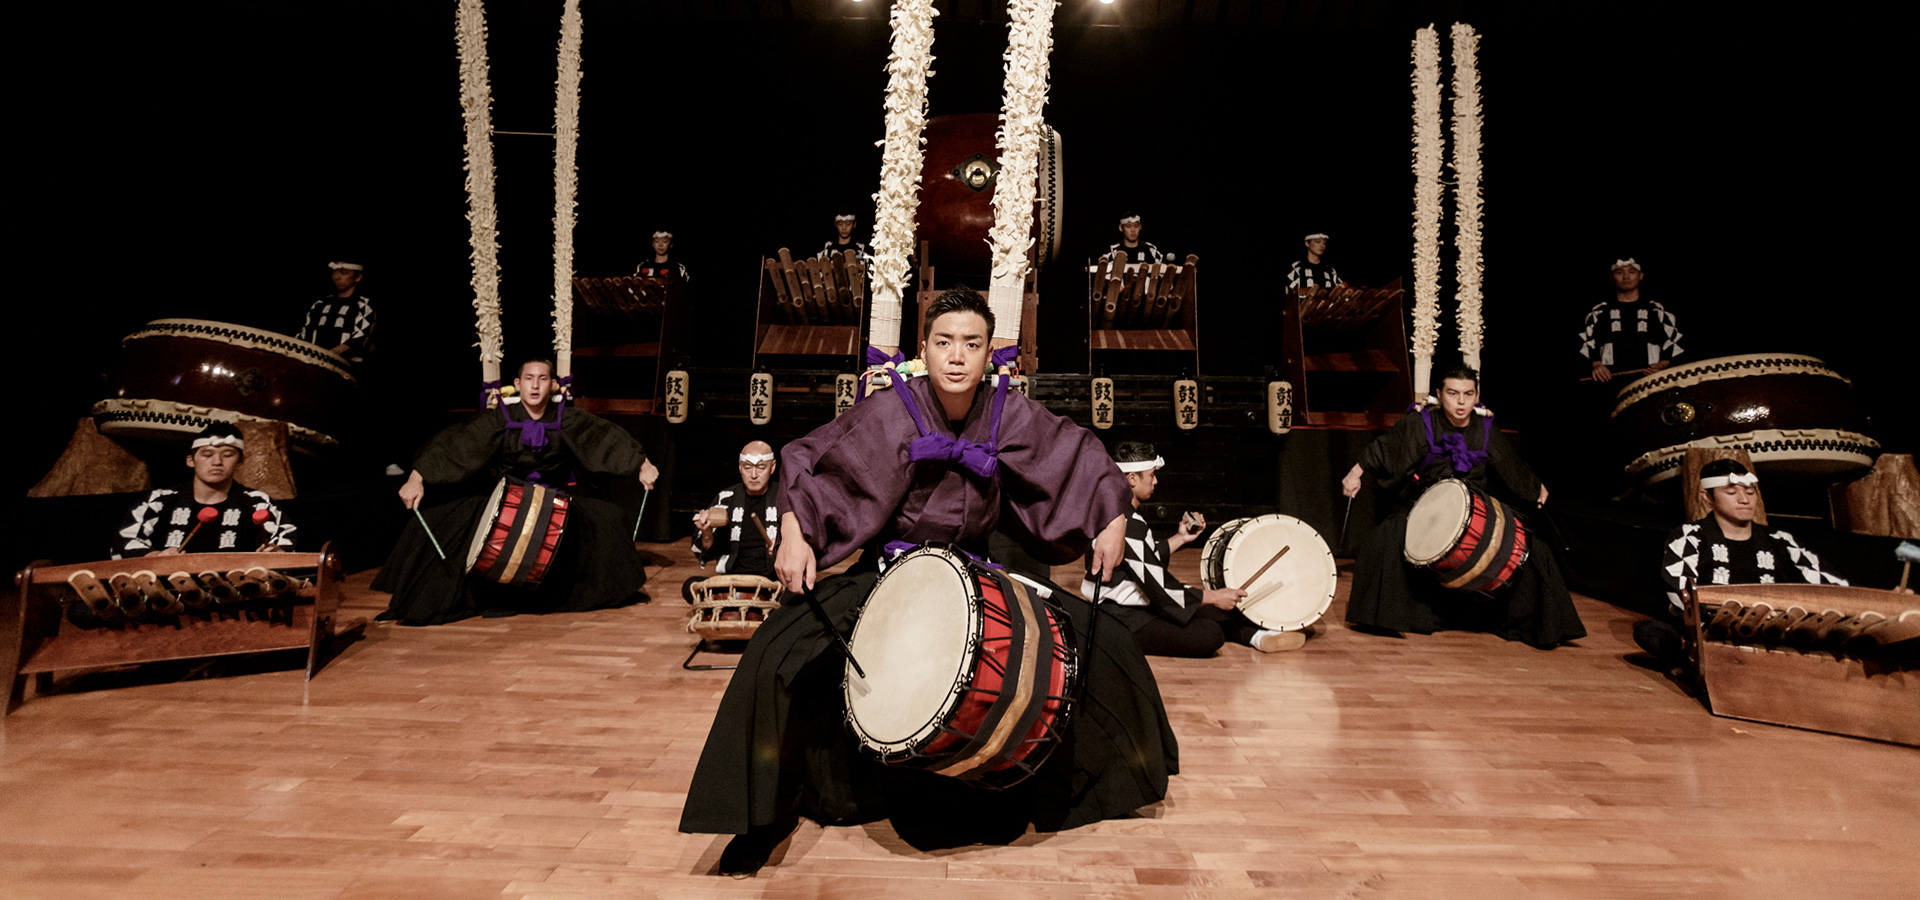 Members of the Kodo Troupe, wearing traditional Japanese attire, sit in front of numerous large drums on stage during an enthusiastic performance of Warabe.